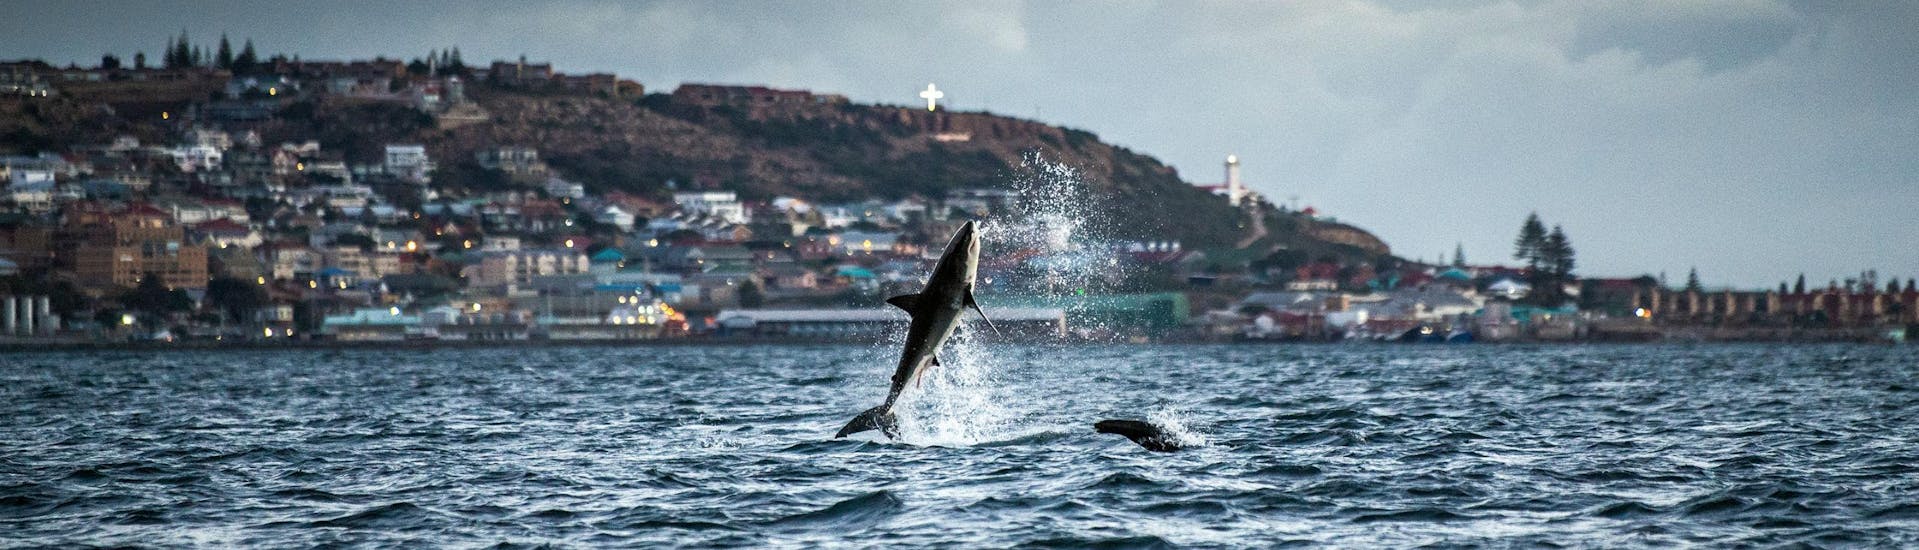 A great white shark is seen breaching in the waters of Mossel Bay, where several operators offer boat trips for visitors.